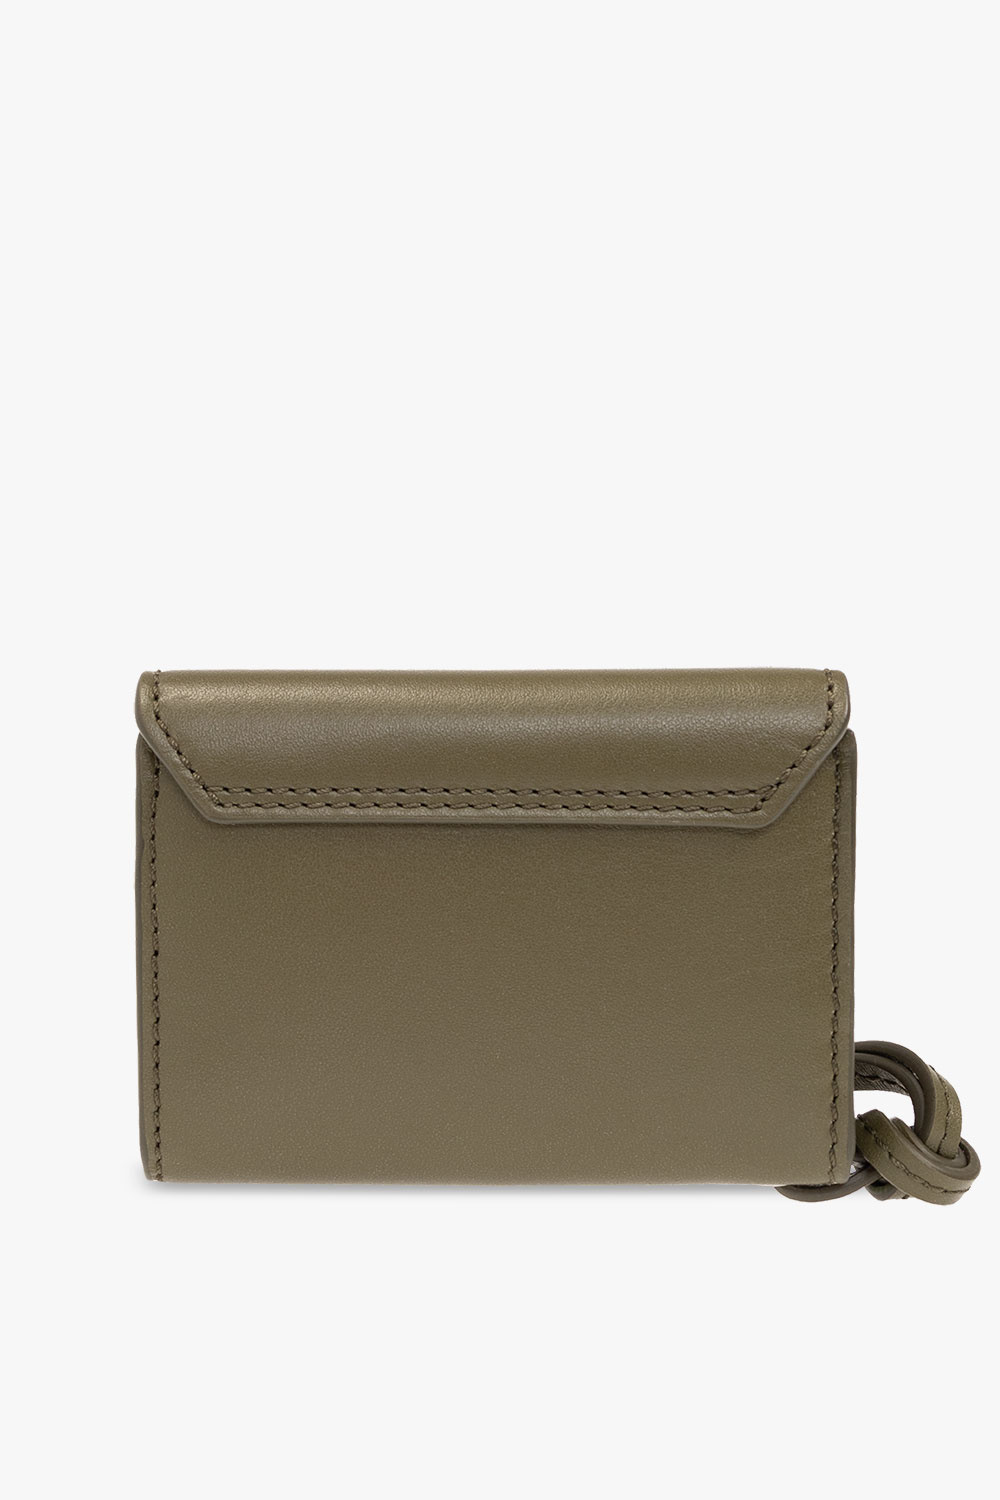 Green Leather wallet with strap Jacquemus - Vitkac HK